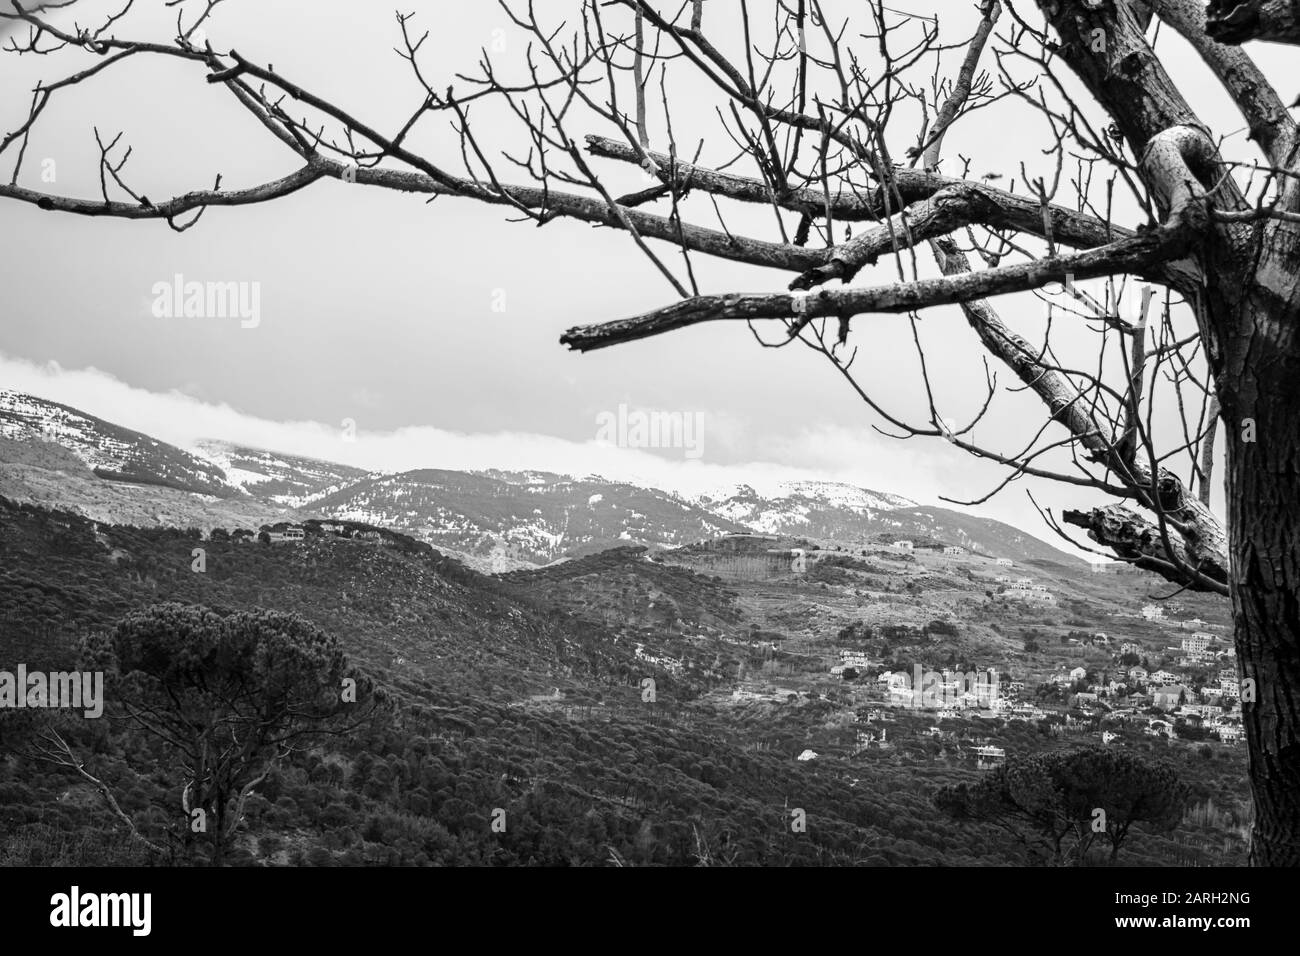 The mountains of Lebanon were once shaded by thick cedar forests and tree is the symbol of country. Beautiful landscape of mountainous town in winter Stock Photo